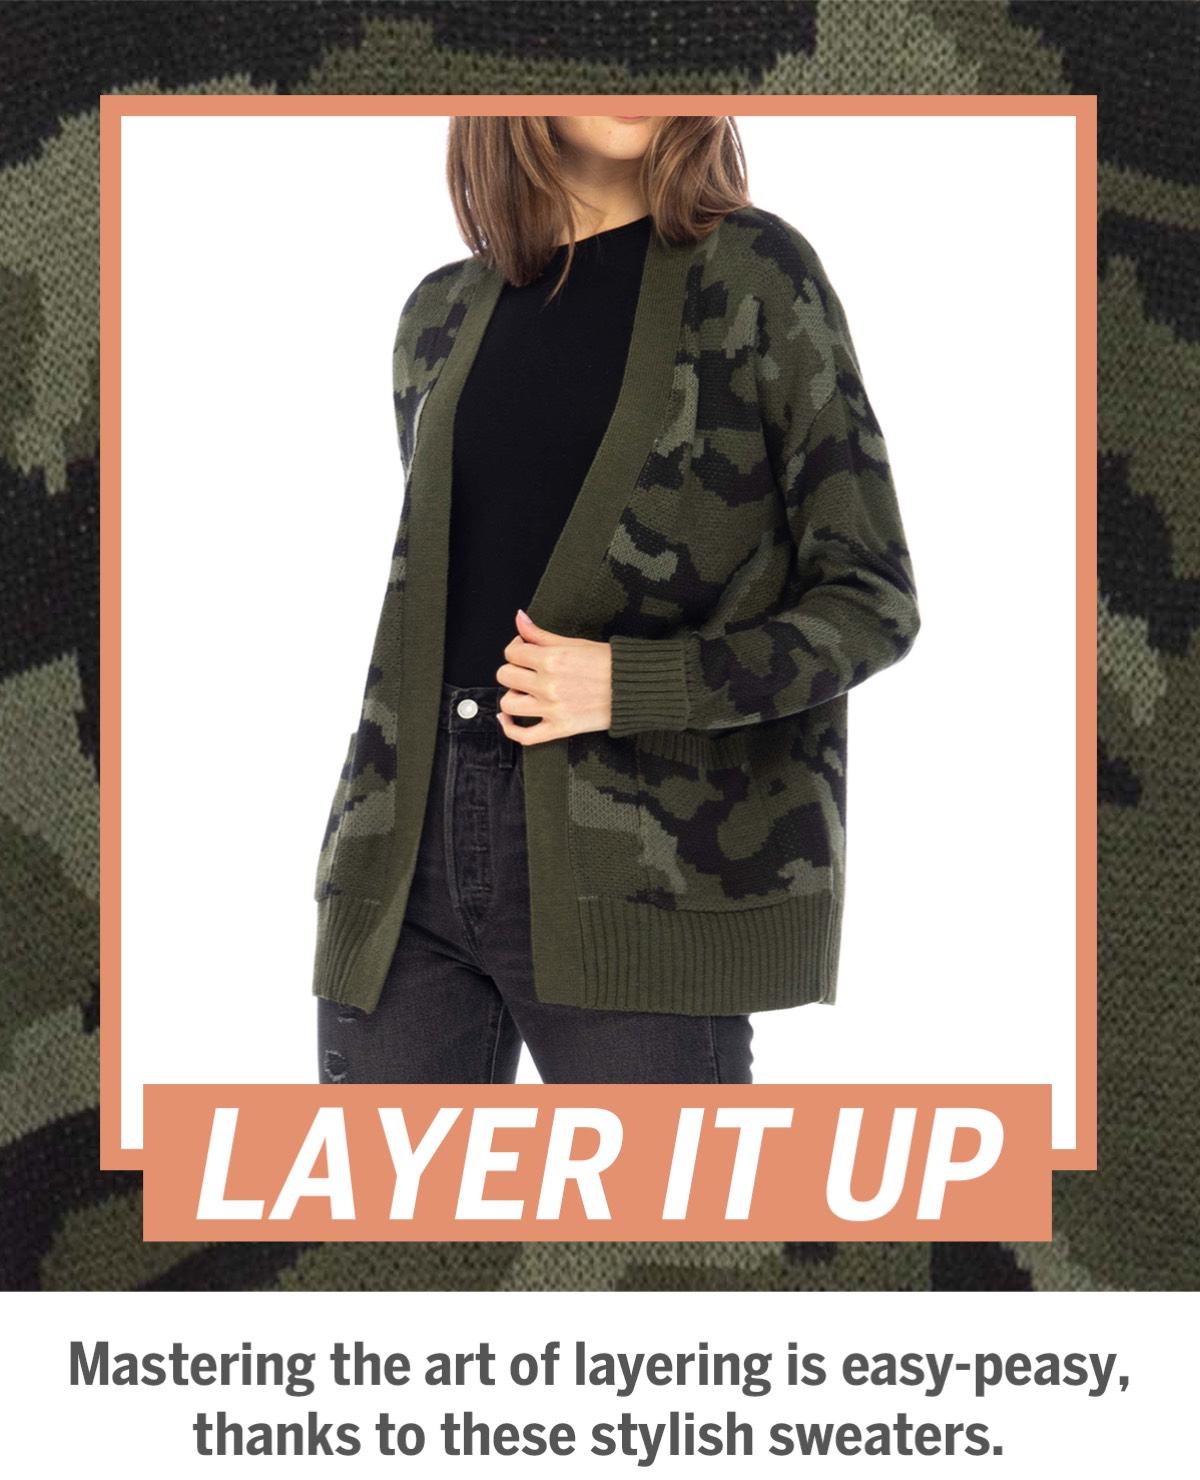 Shop the &quot;Camouflage Cardigan Sweater&quot;